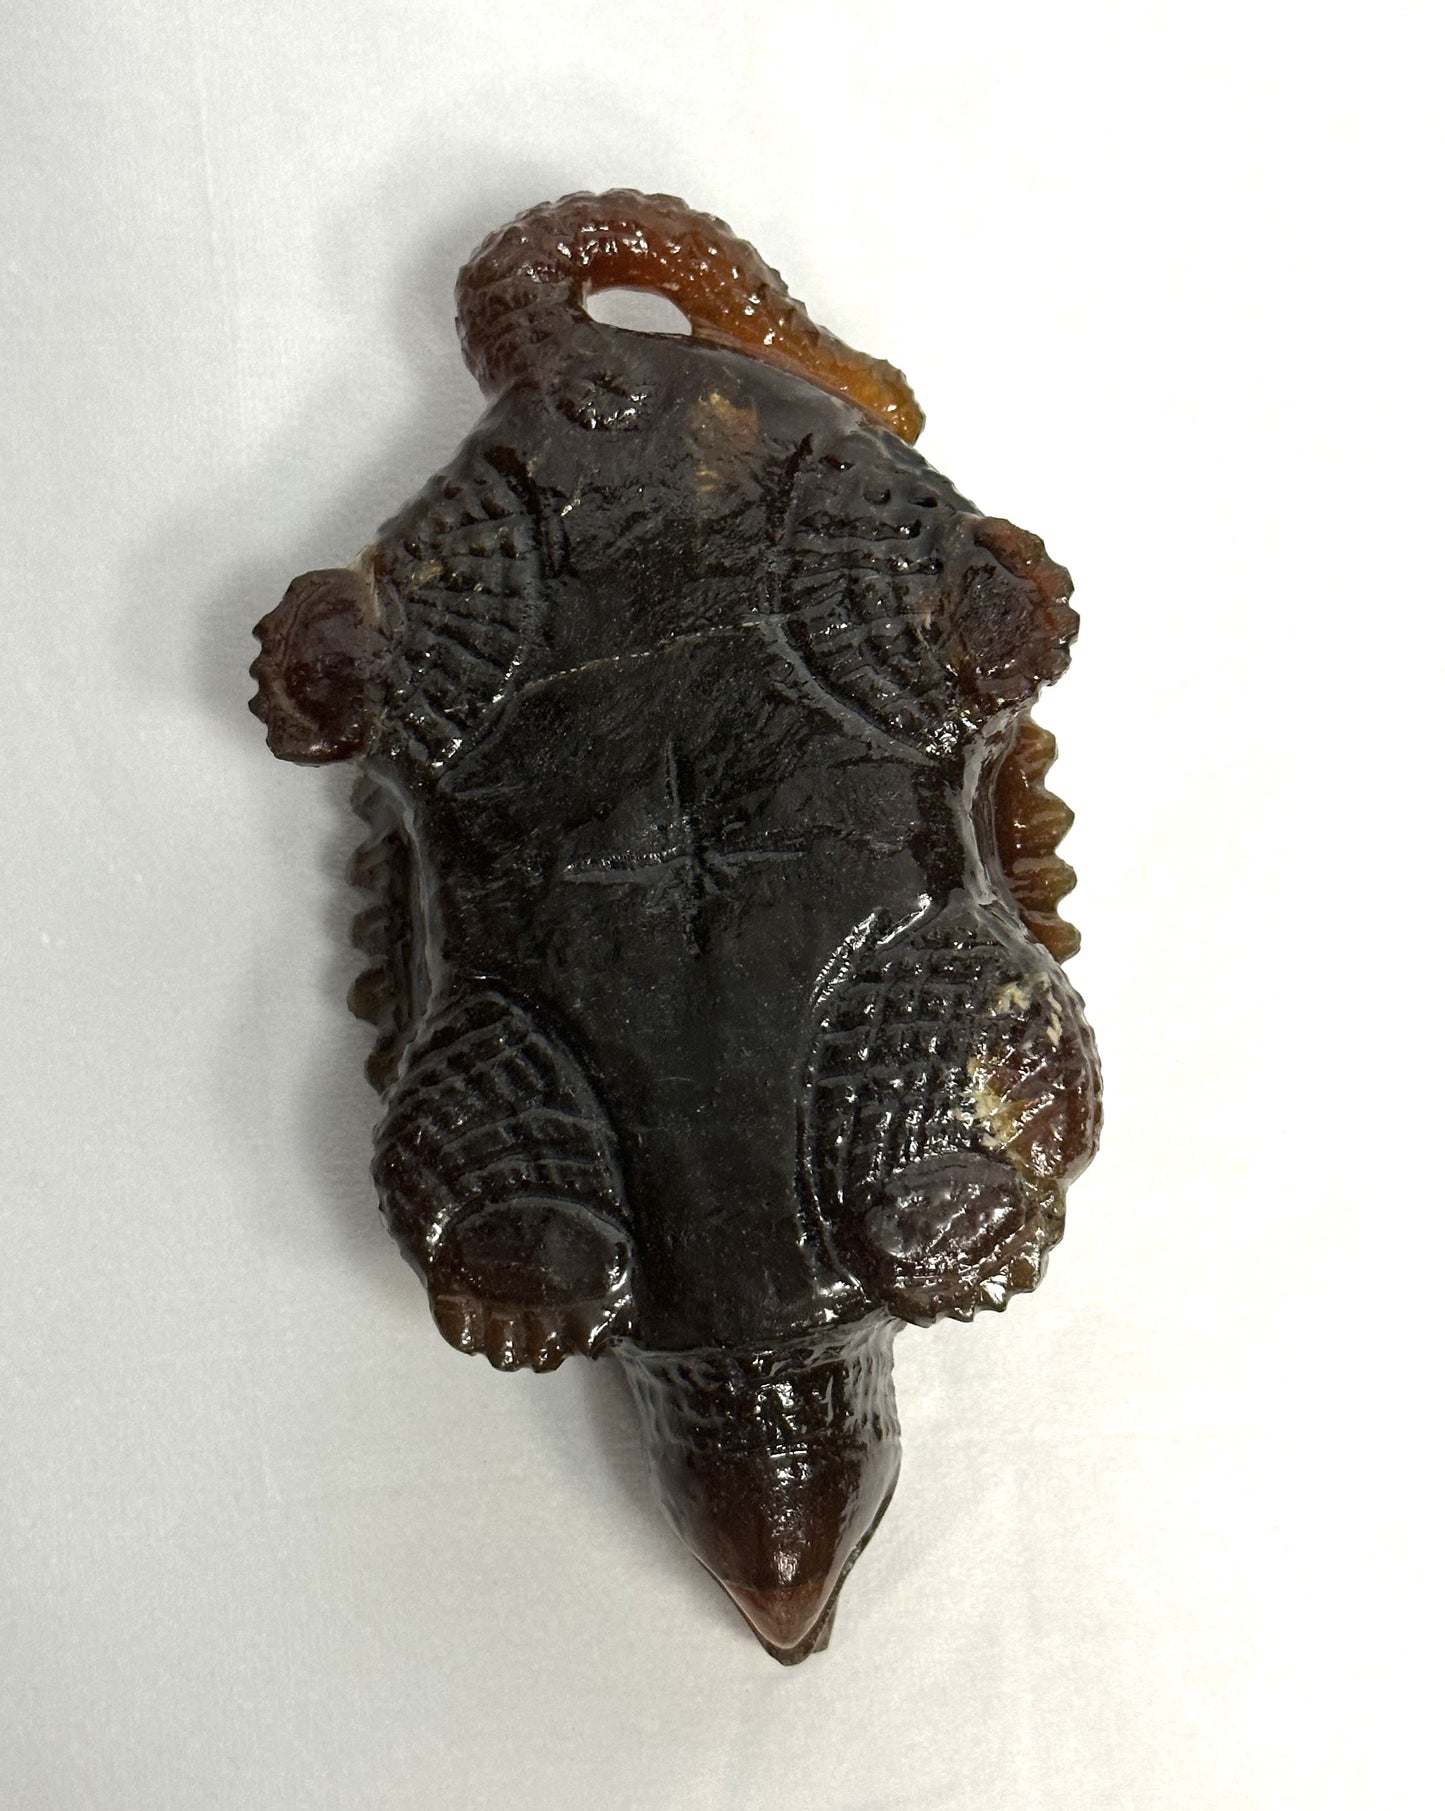 Stunning Amber Snapping Turtle